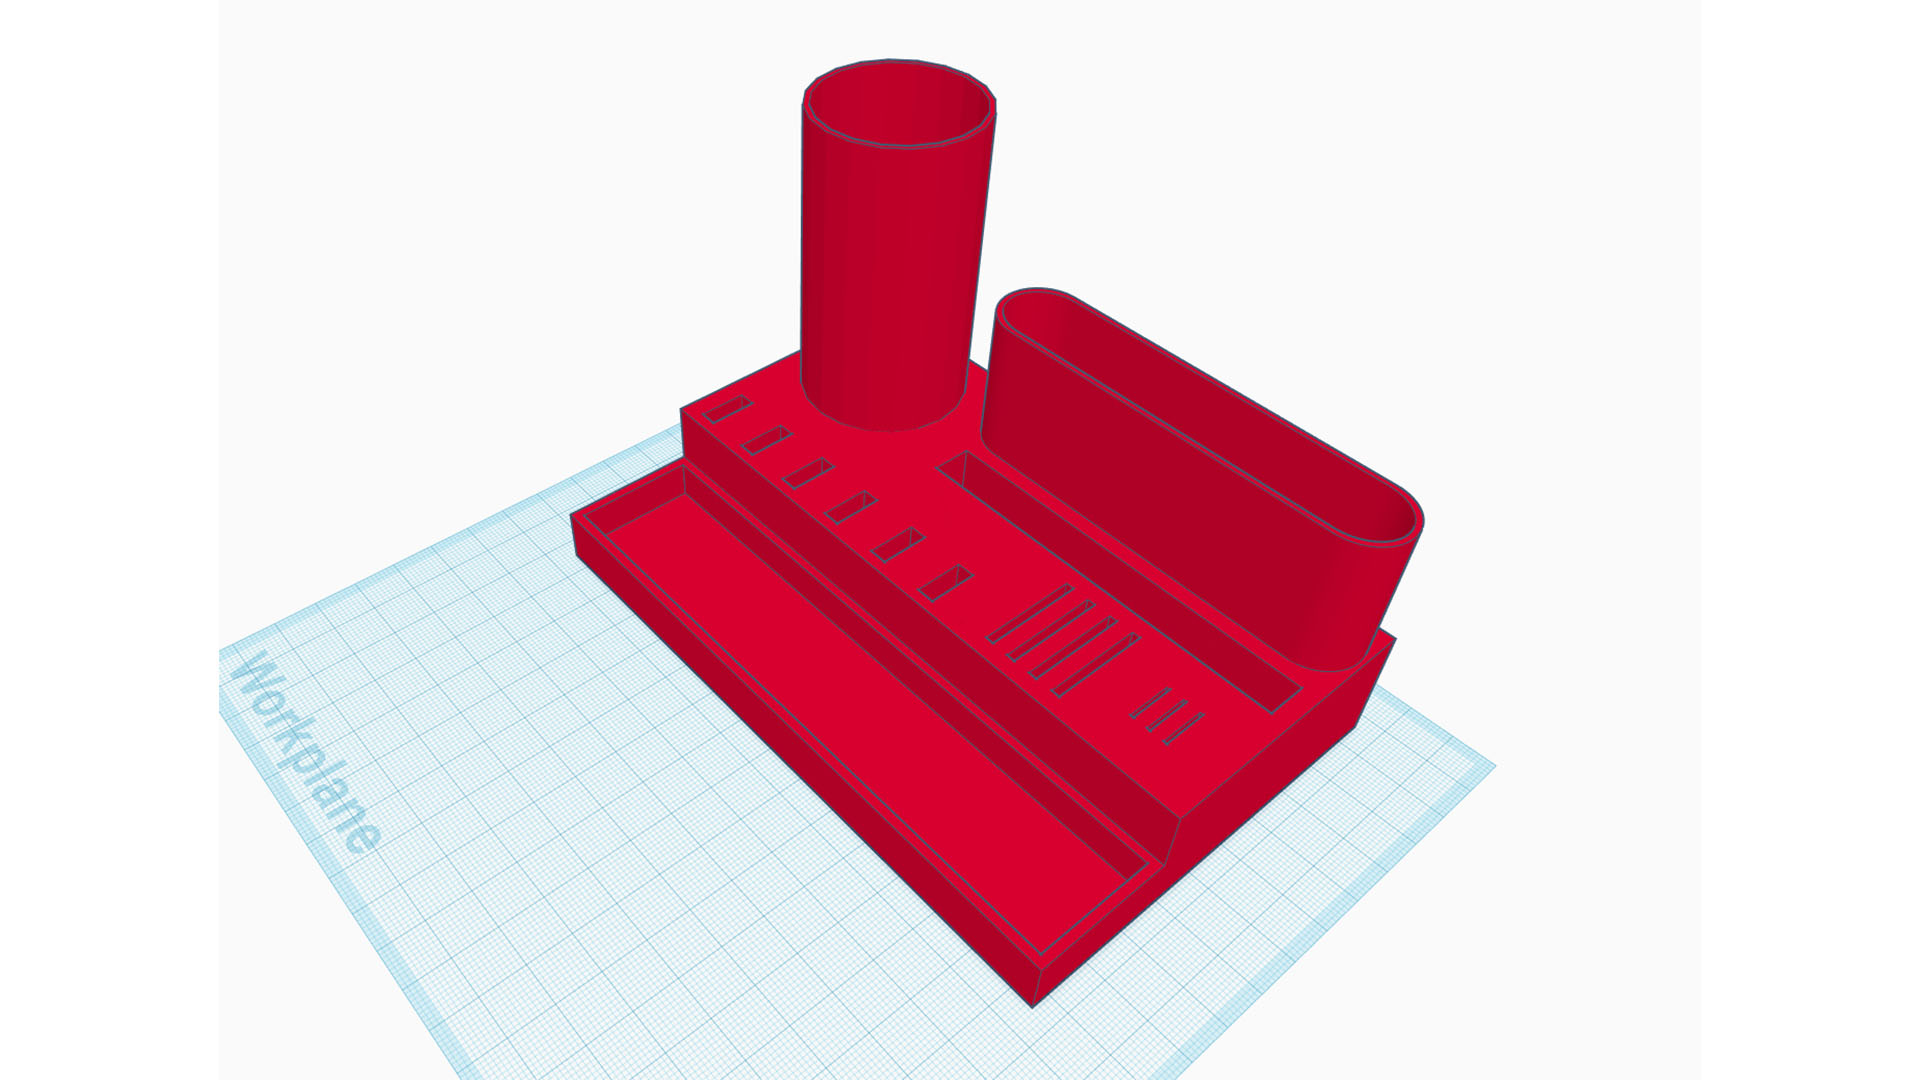 3D print case with TinkerCAD